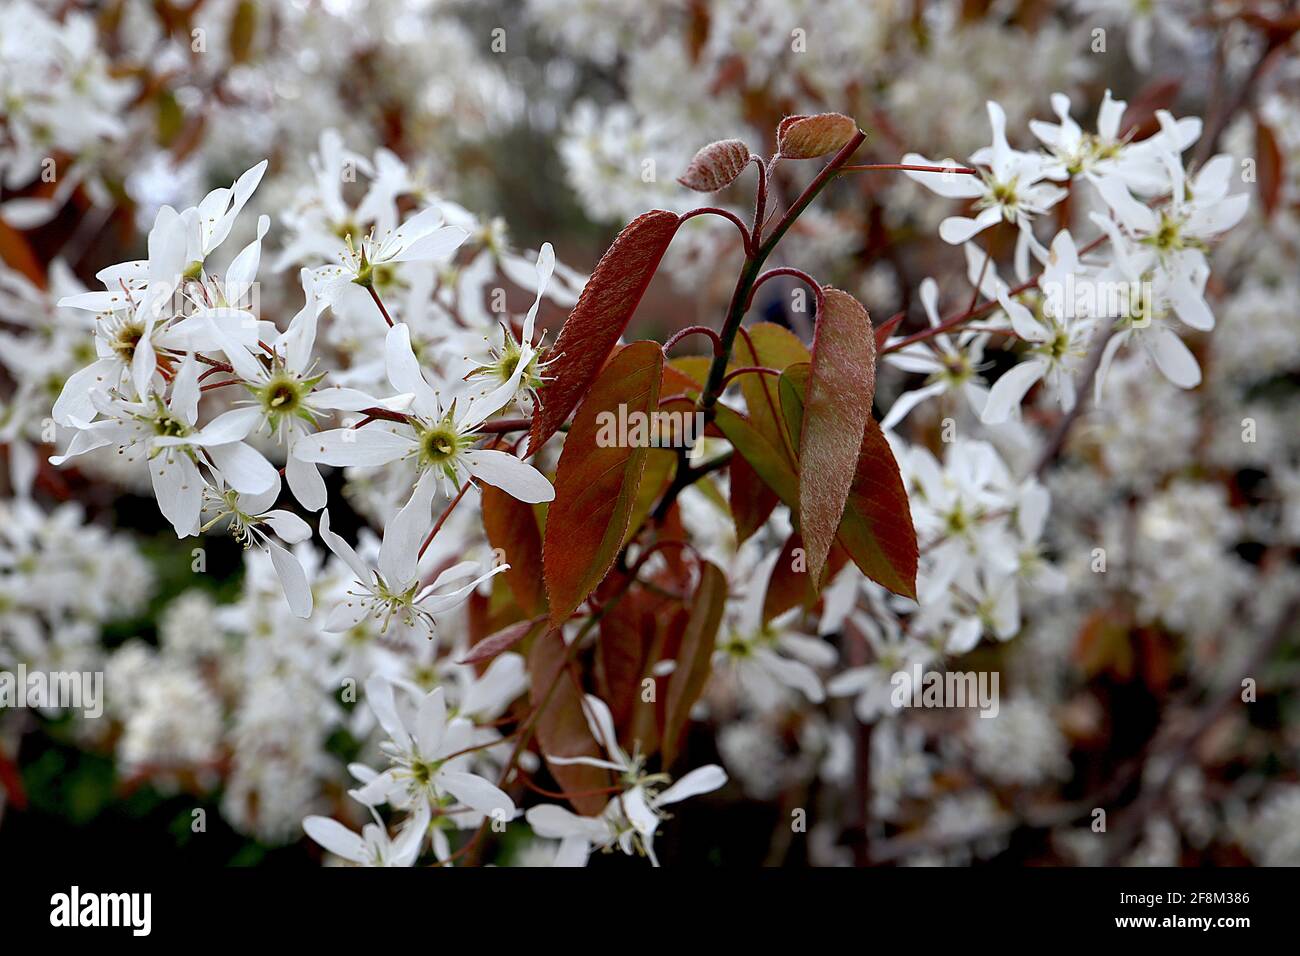 Amelanchier lamarckii Serviceberry or juneberry – white star-shaped flowers and bronze leaves,  April, England, UK Stock Photo